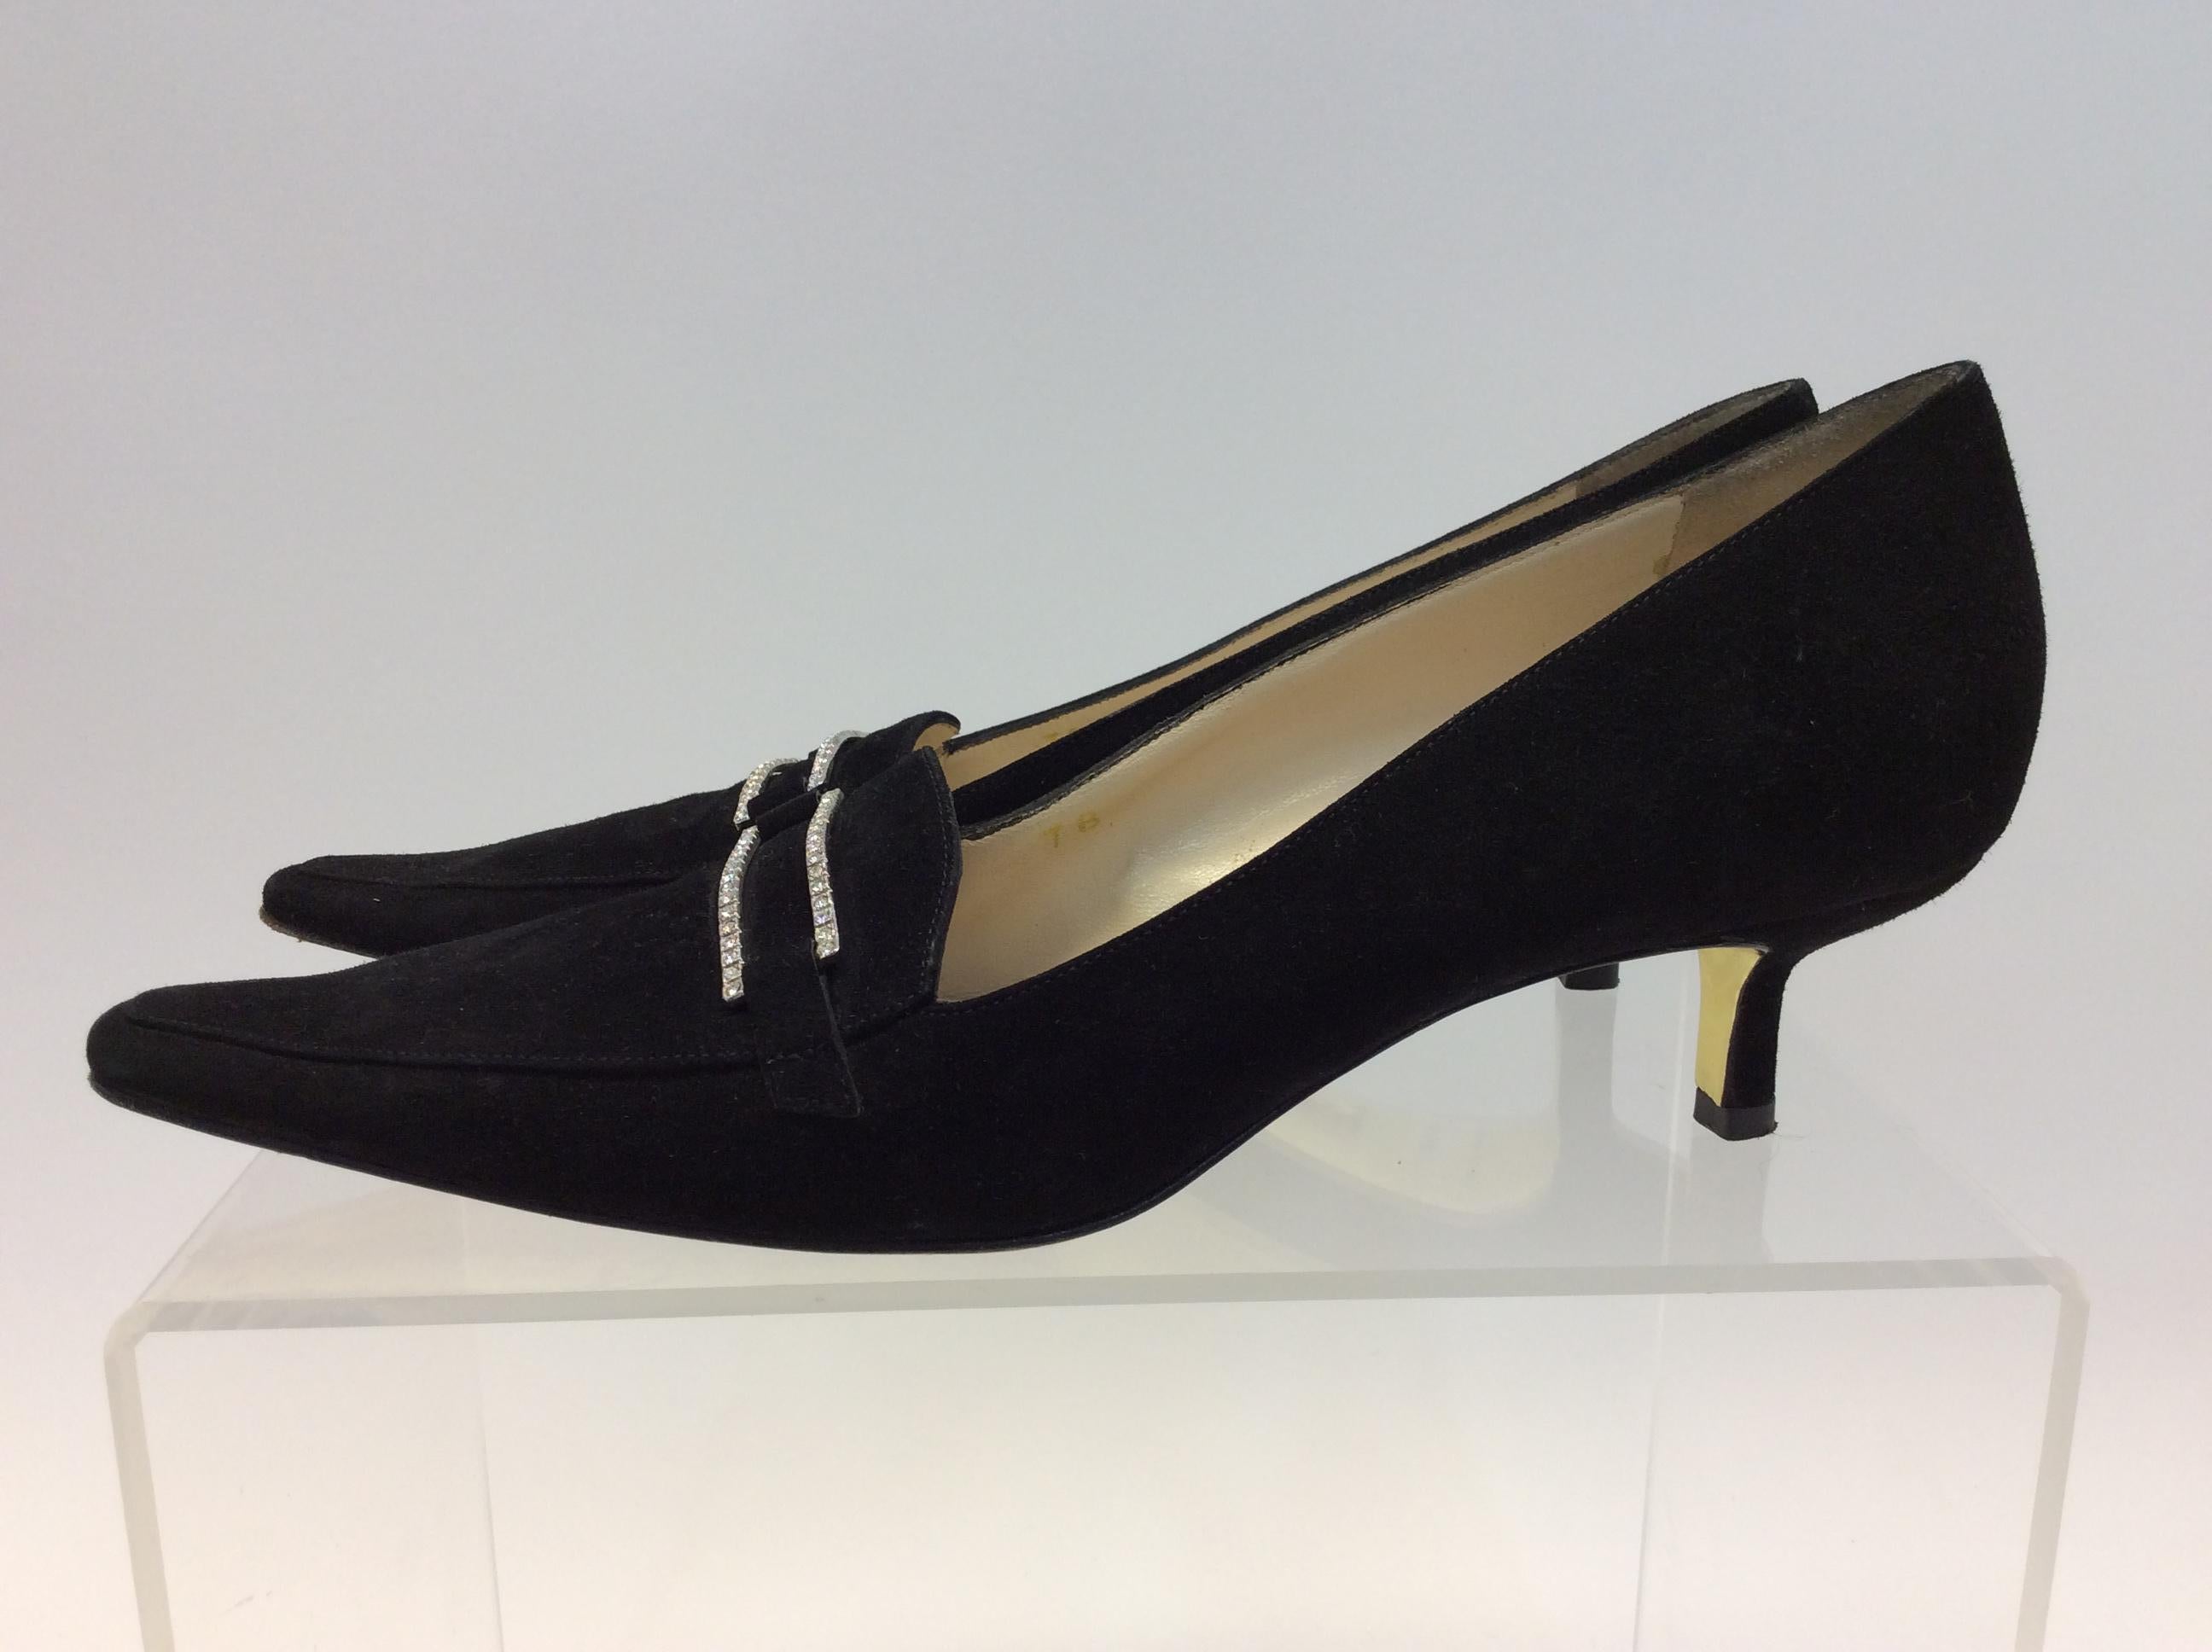 Judith Leiber Black Suede Pump
$199
Made in Italy
Suede
Size 7
1.75